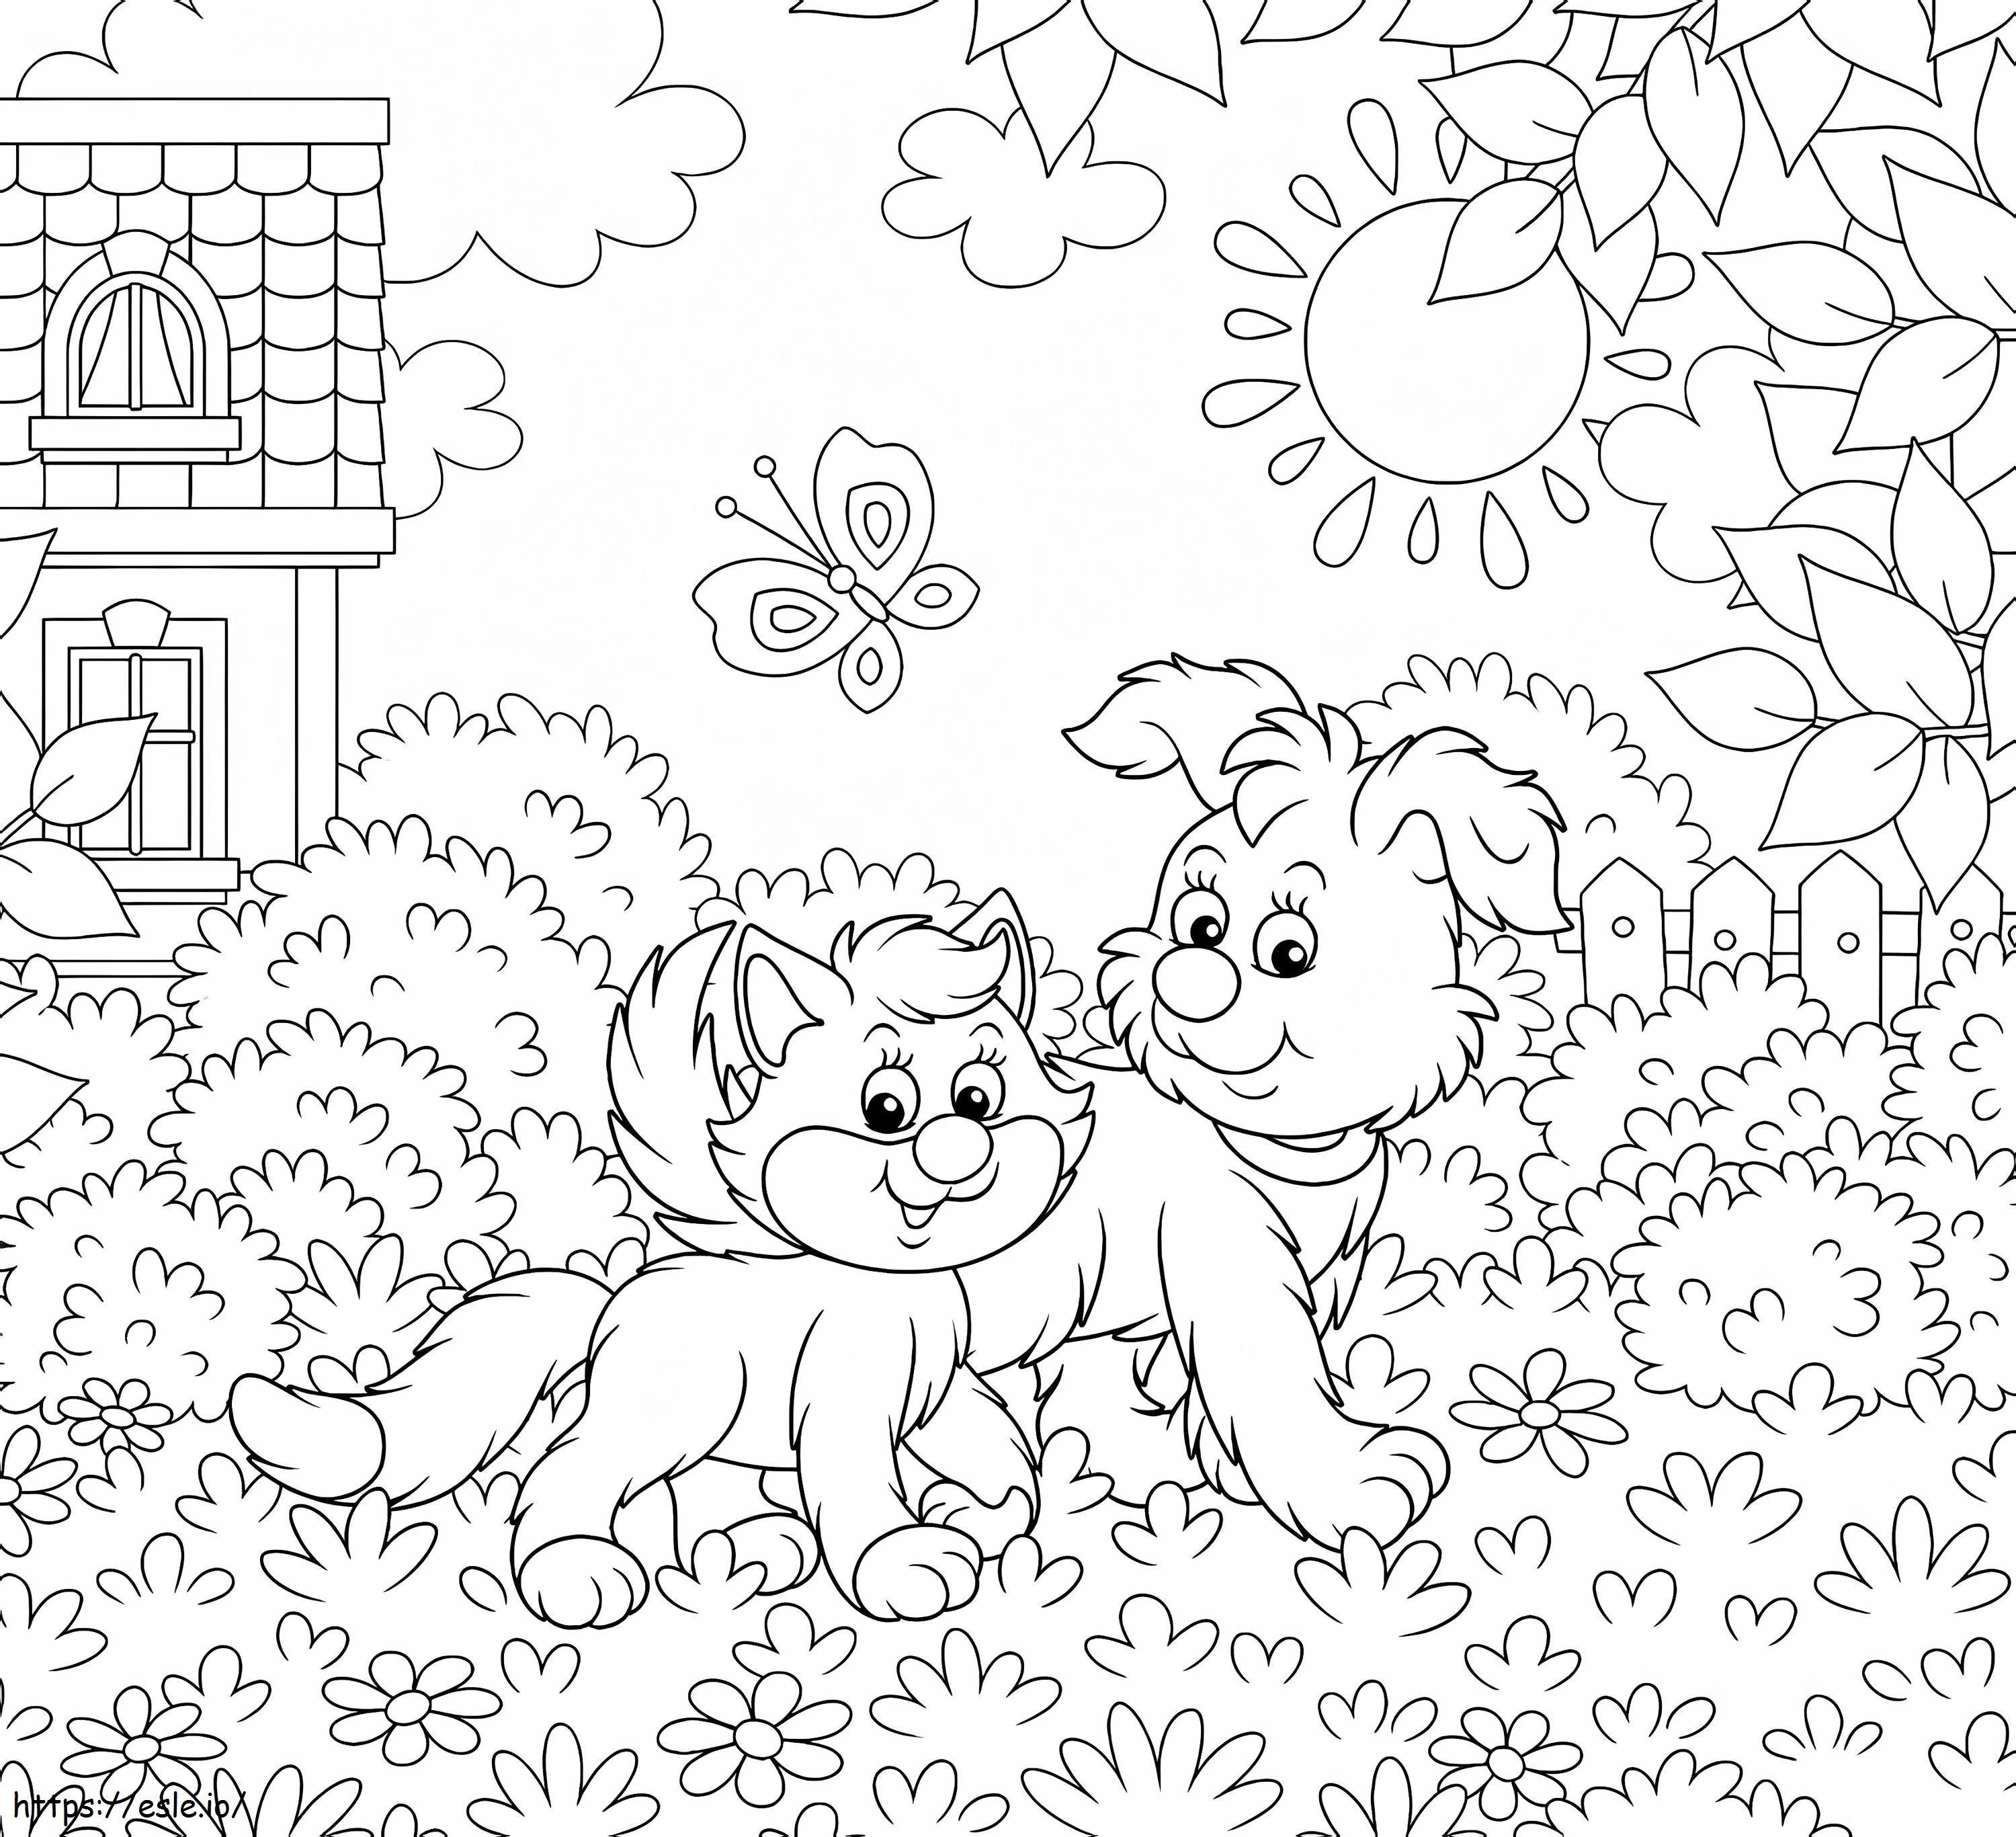 Dog And Cat In The Garden coloring page